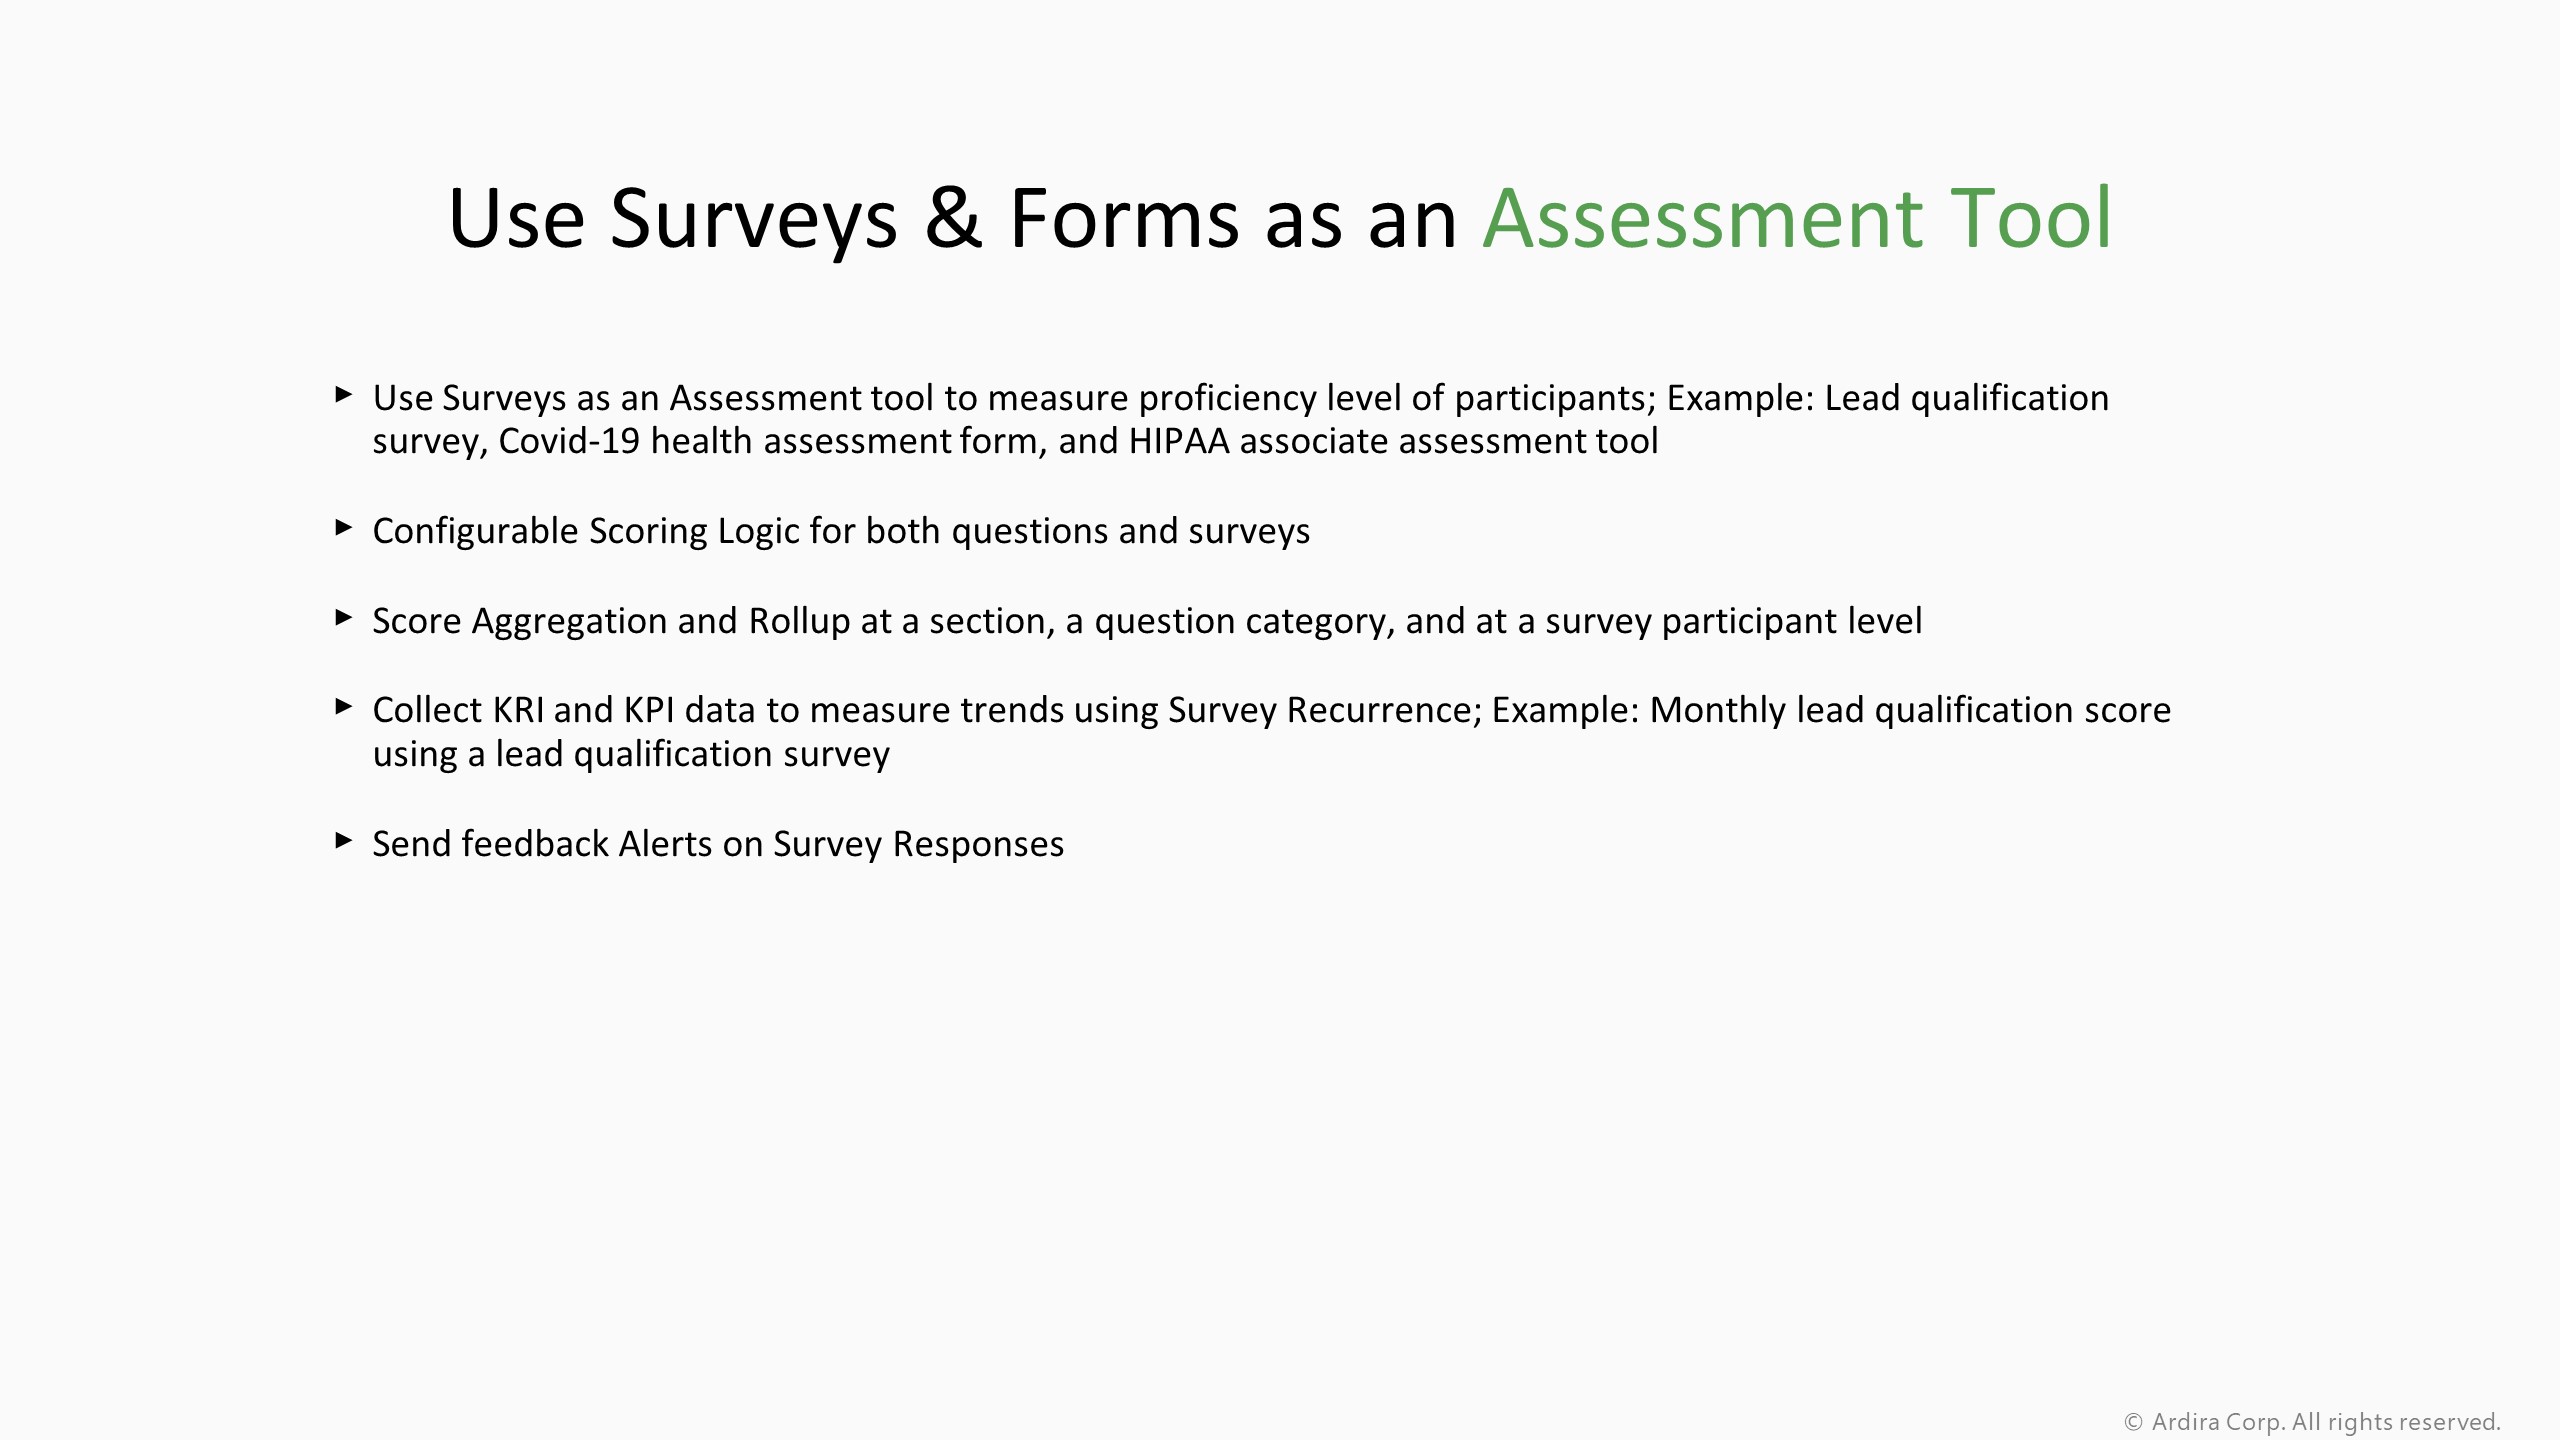 Use Surveys & Forms as an Assessment Tool